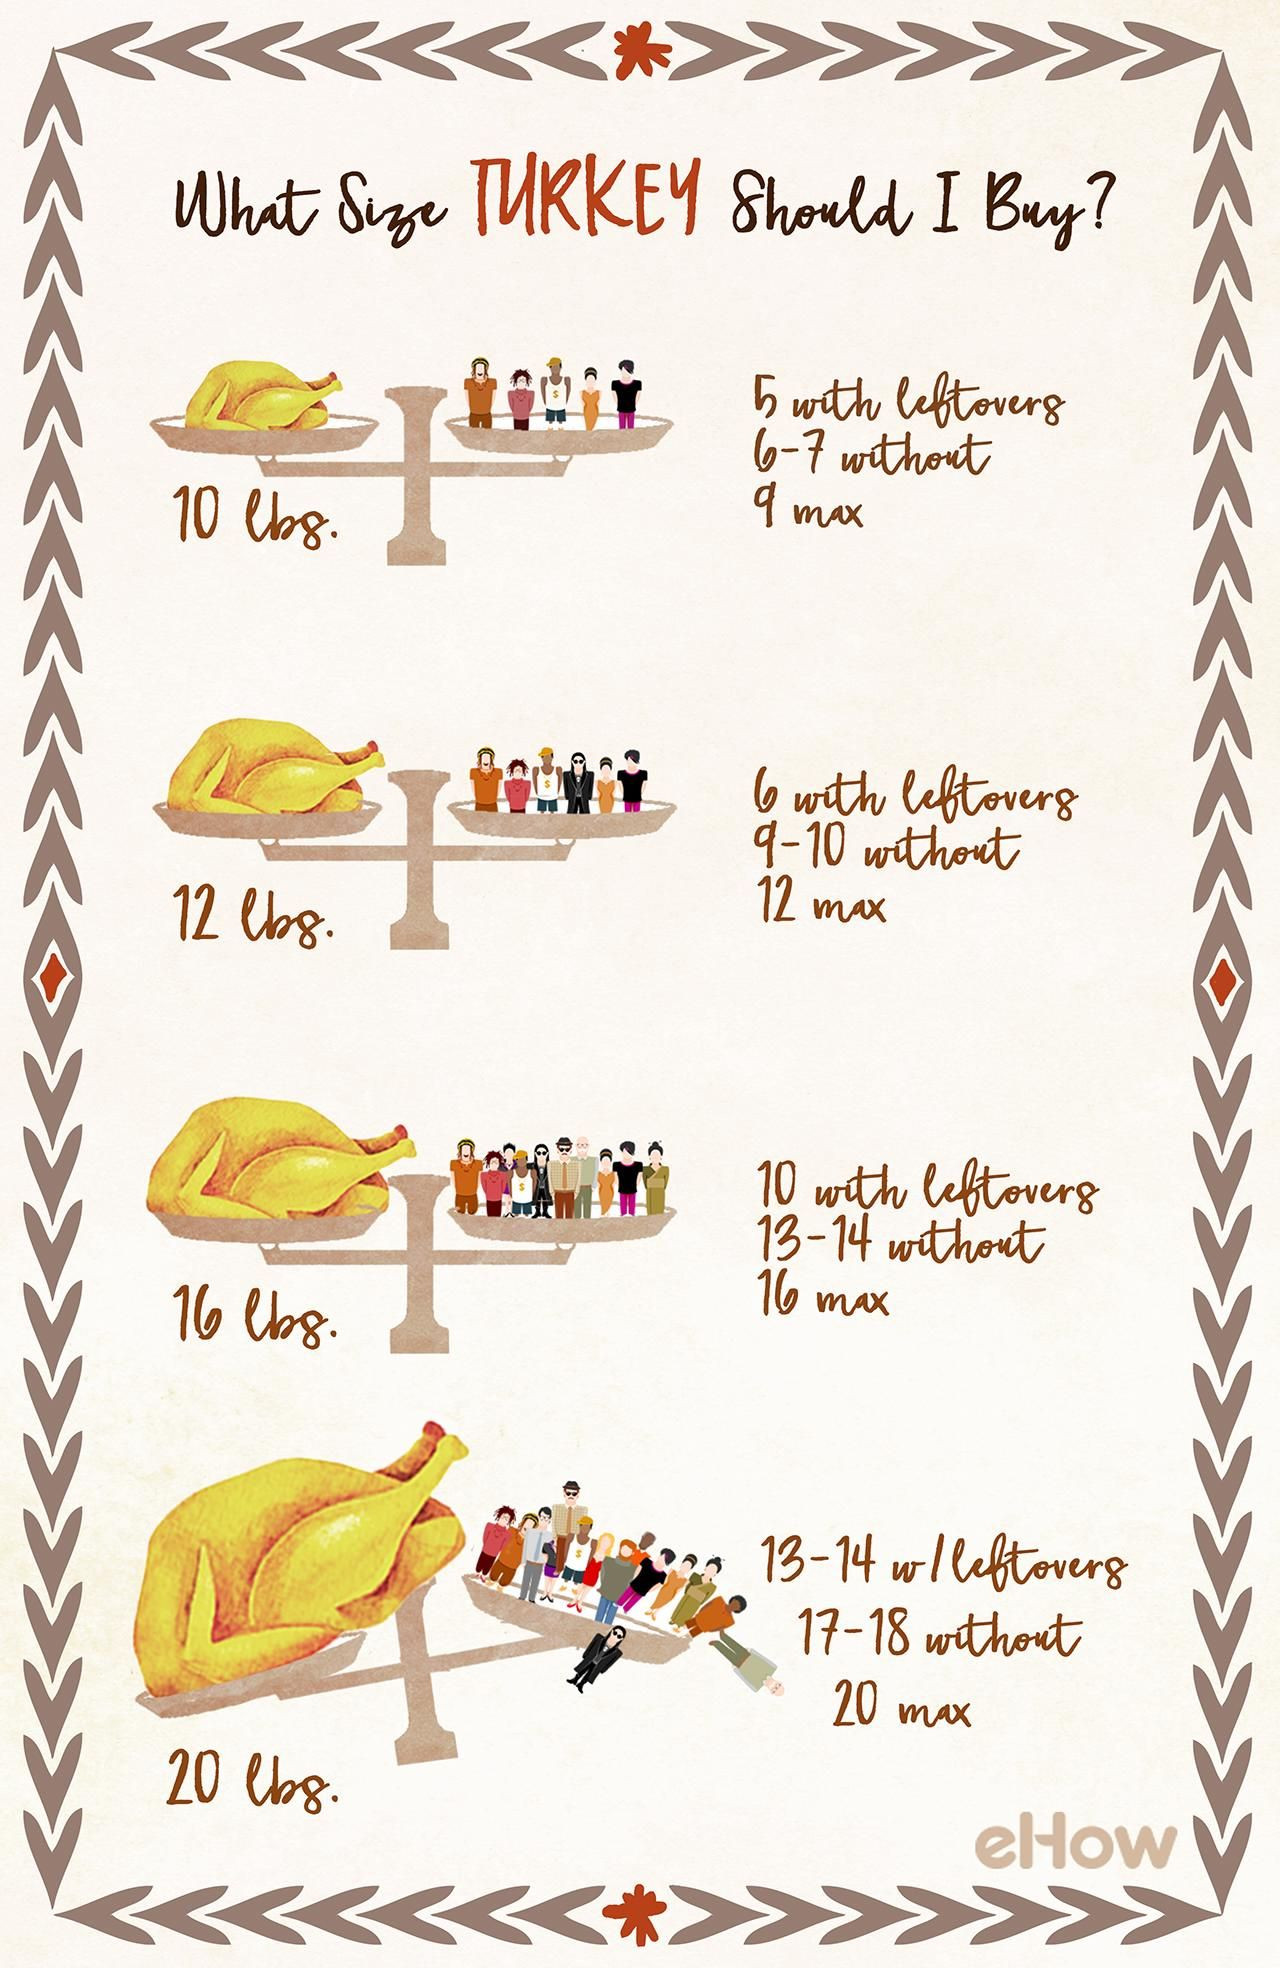 Pounds Of Turkey Per Person Thanksgiving
 How to Figure Out What Size Turkey to Buy